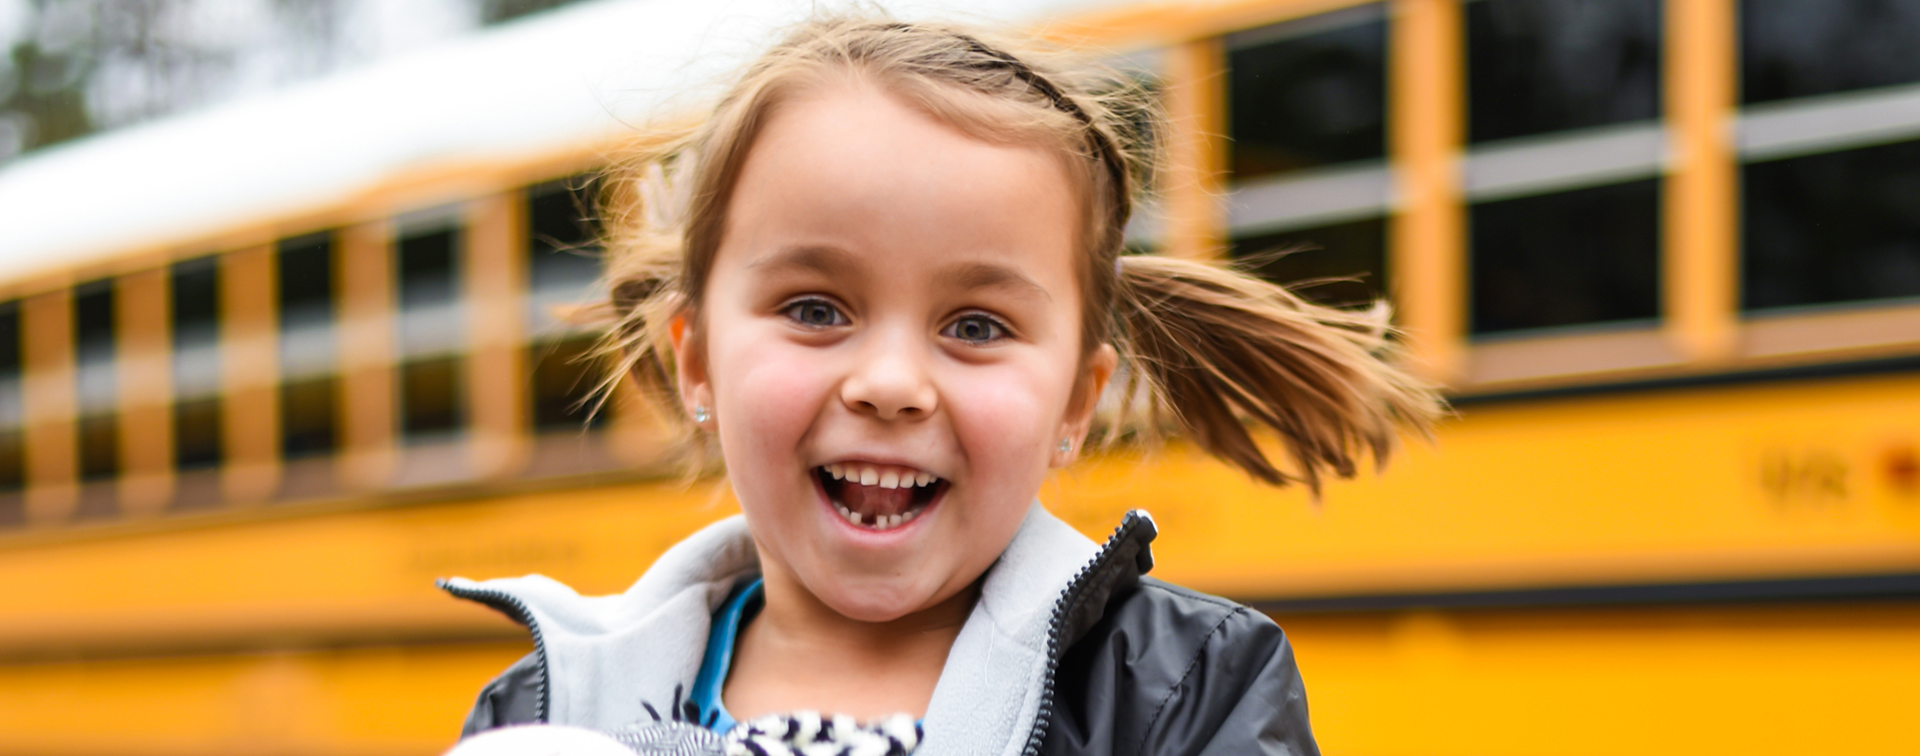 child smiling in front of bus 